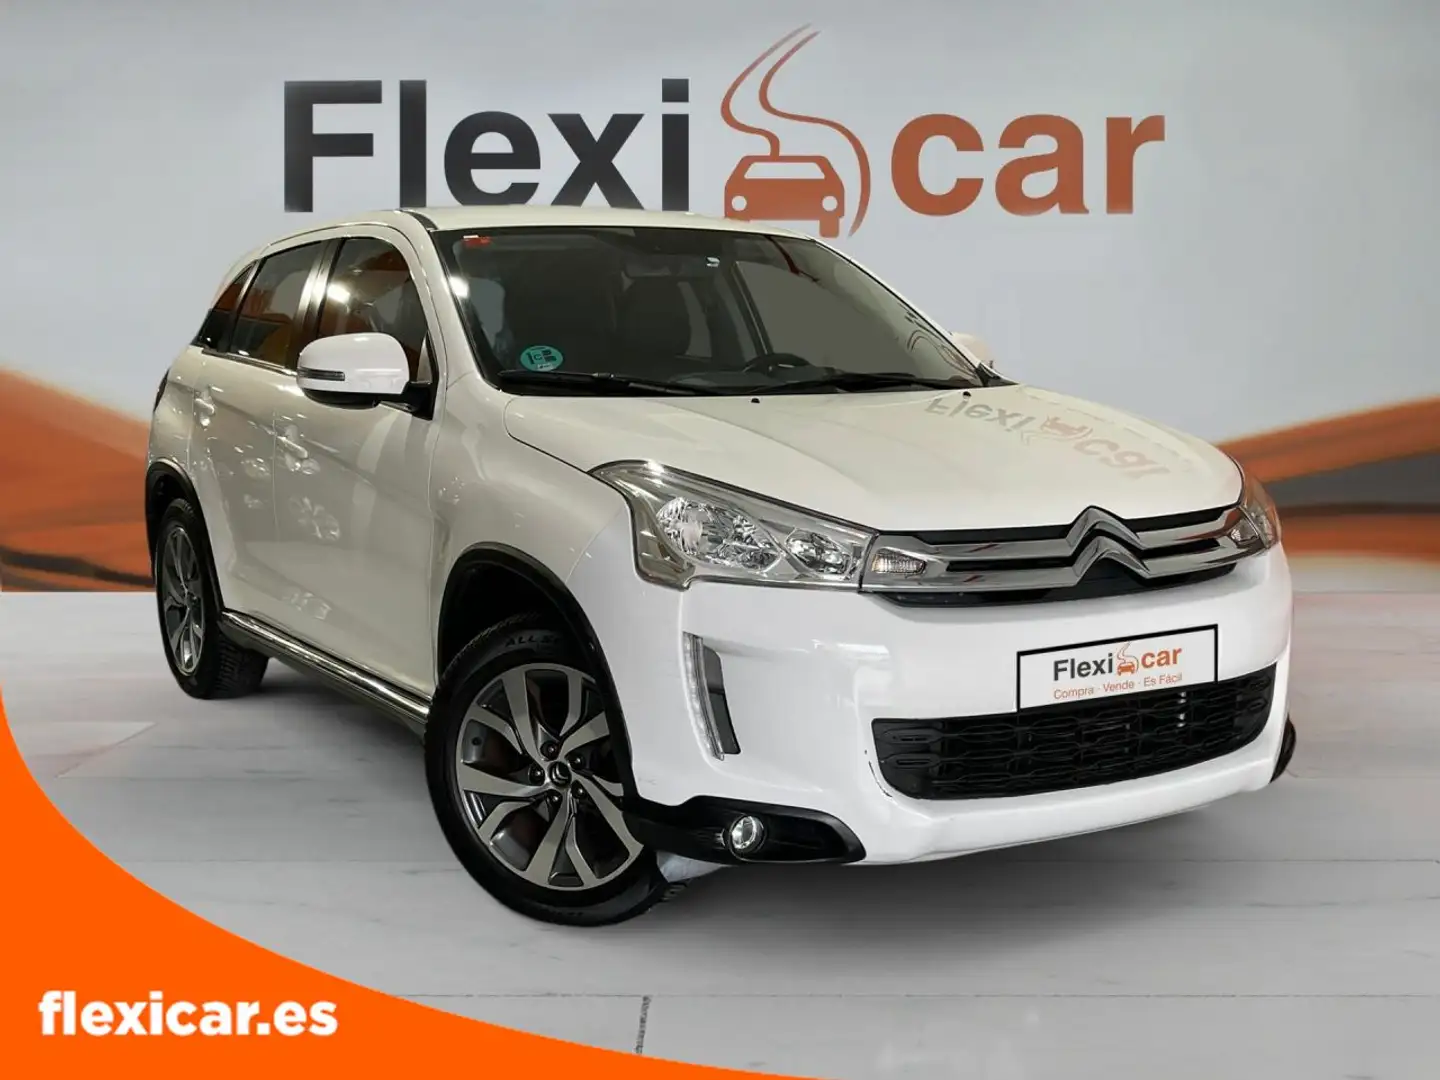 Citroen C4 Aircross 1.6HDI S&S Attraction 2WD 115 White - 2